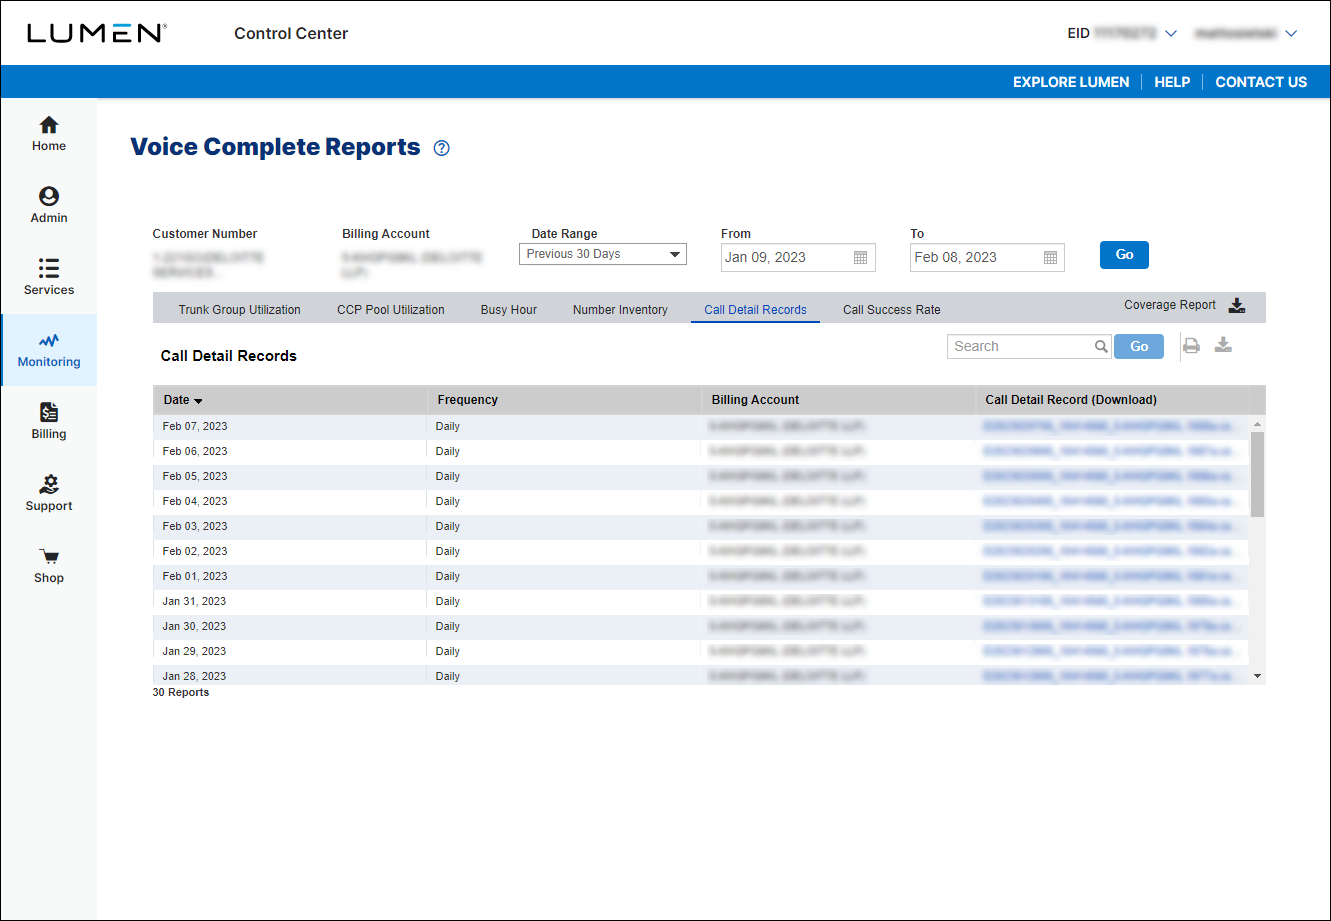 Voice Complete Reports (showing Call Detail Records)